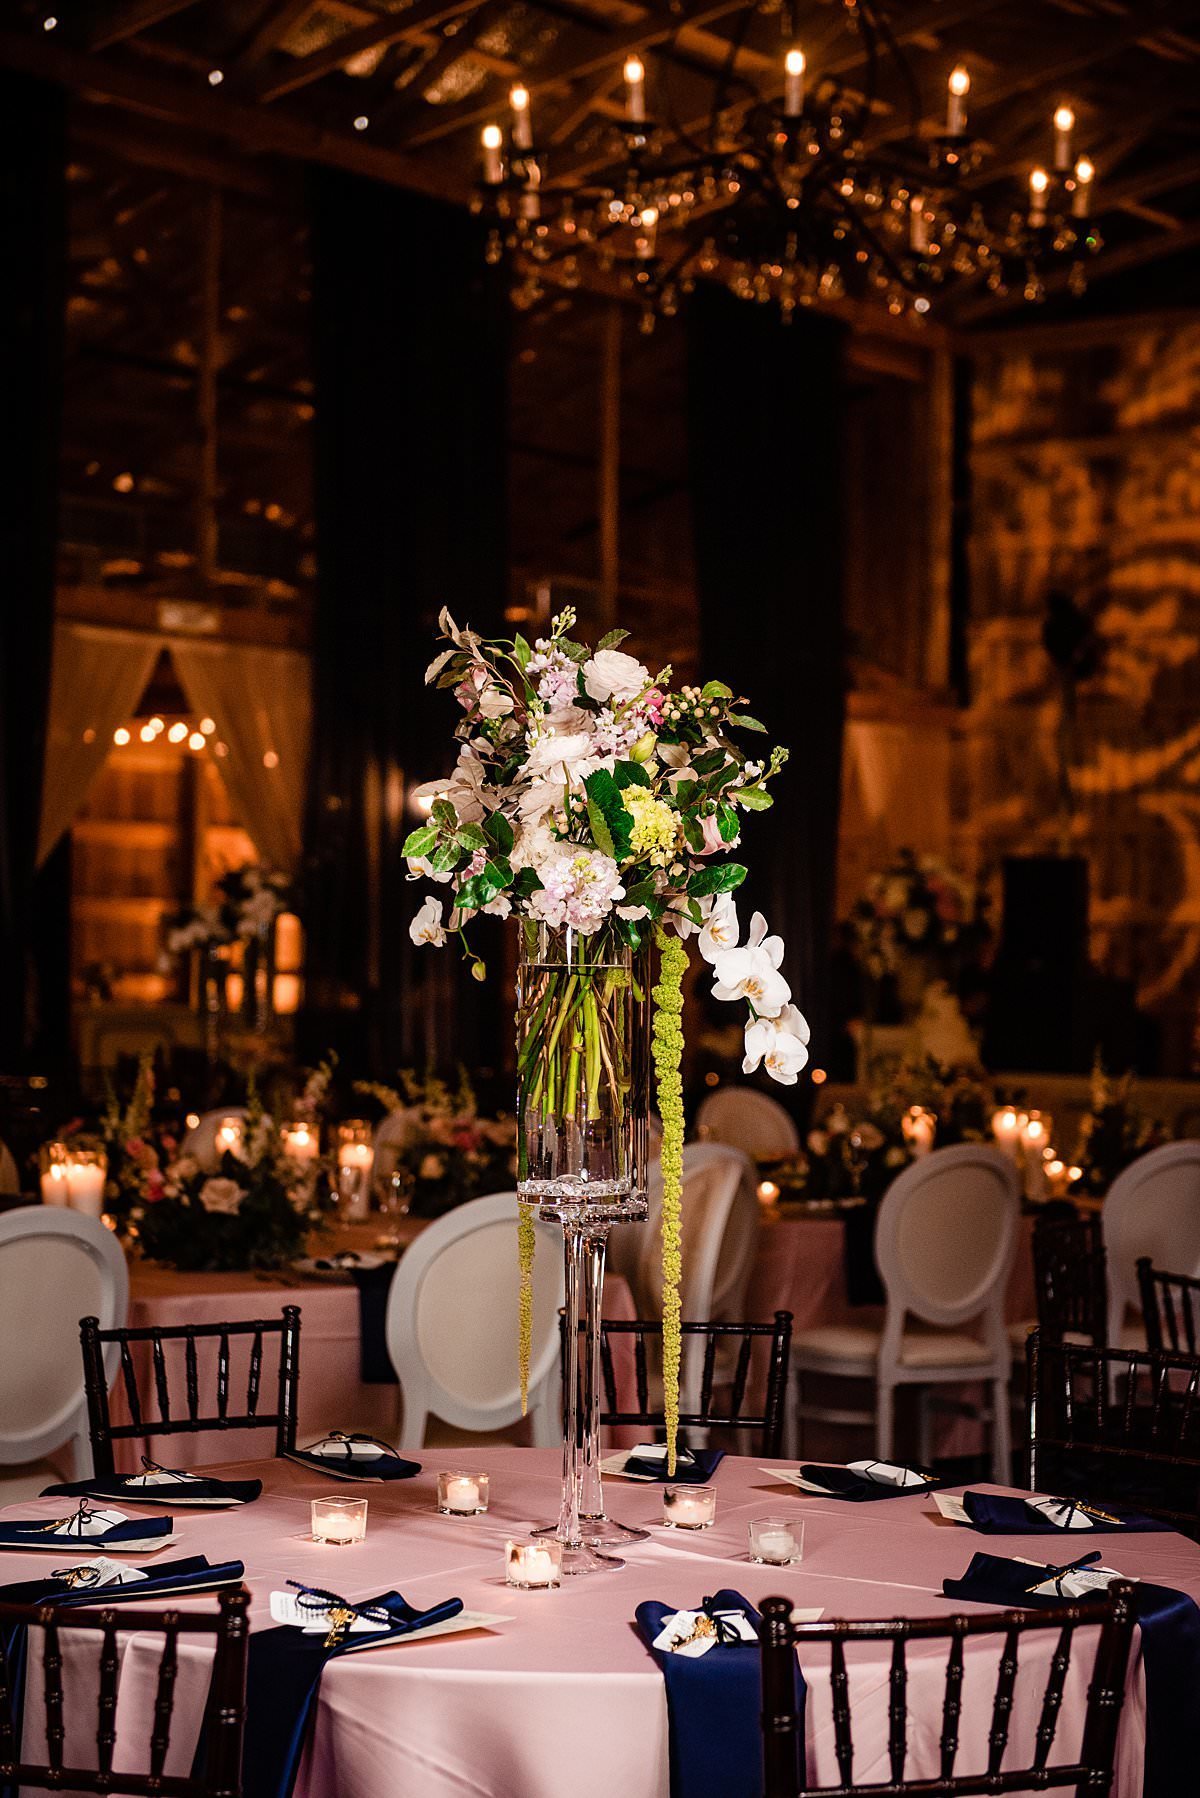 Tall centerpieces with orchids and hanging greenery